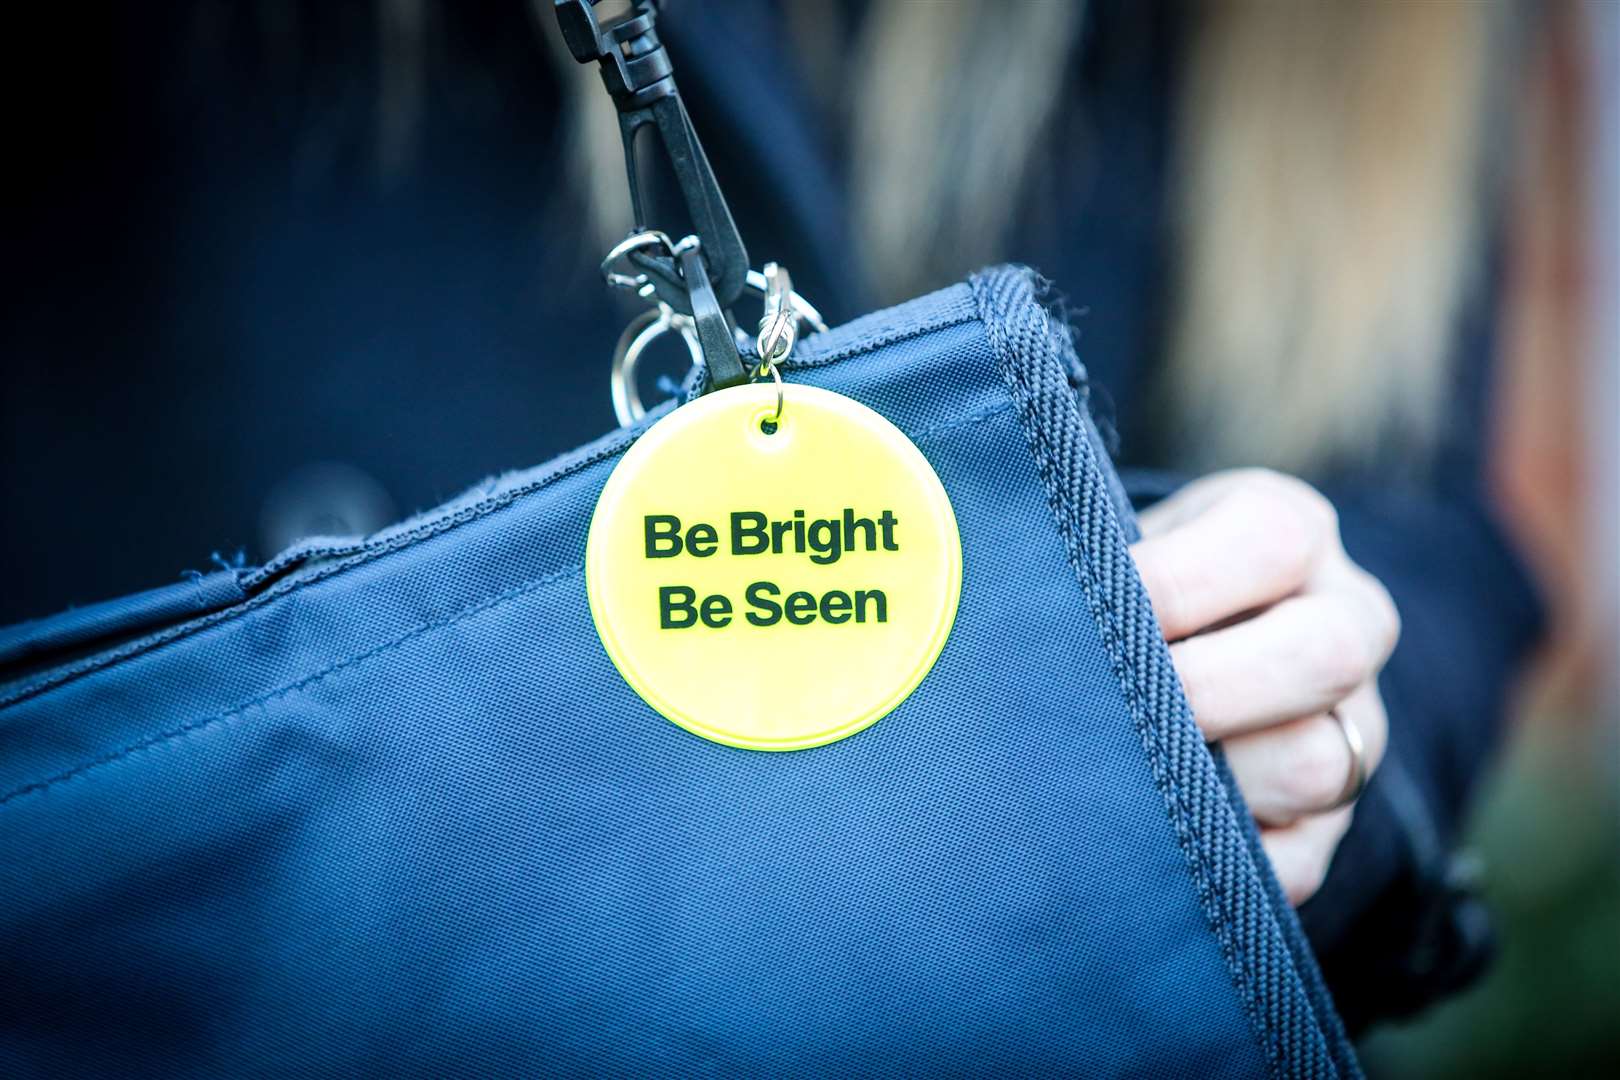 Applications are now open to claim your free reflective keyrings